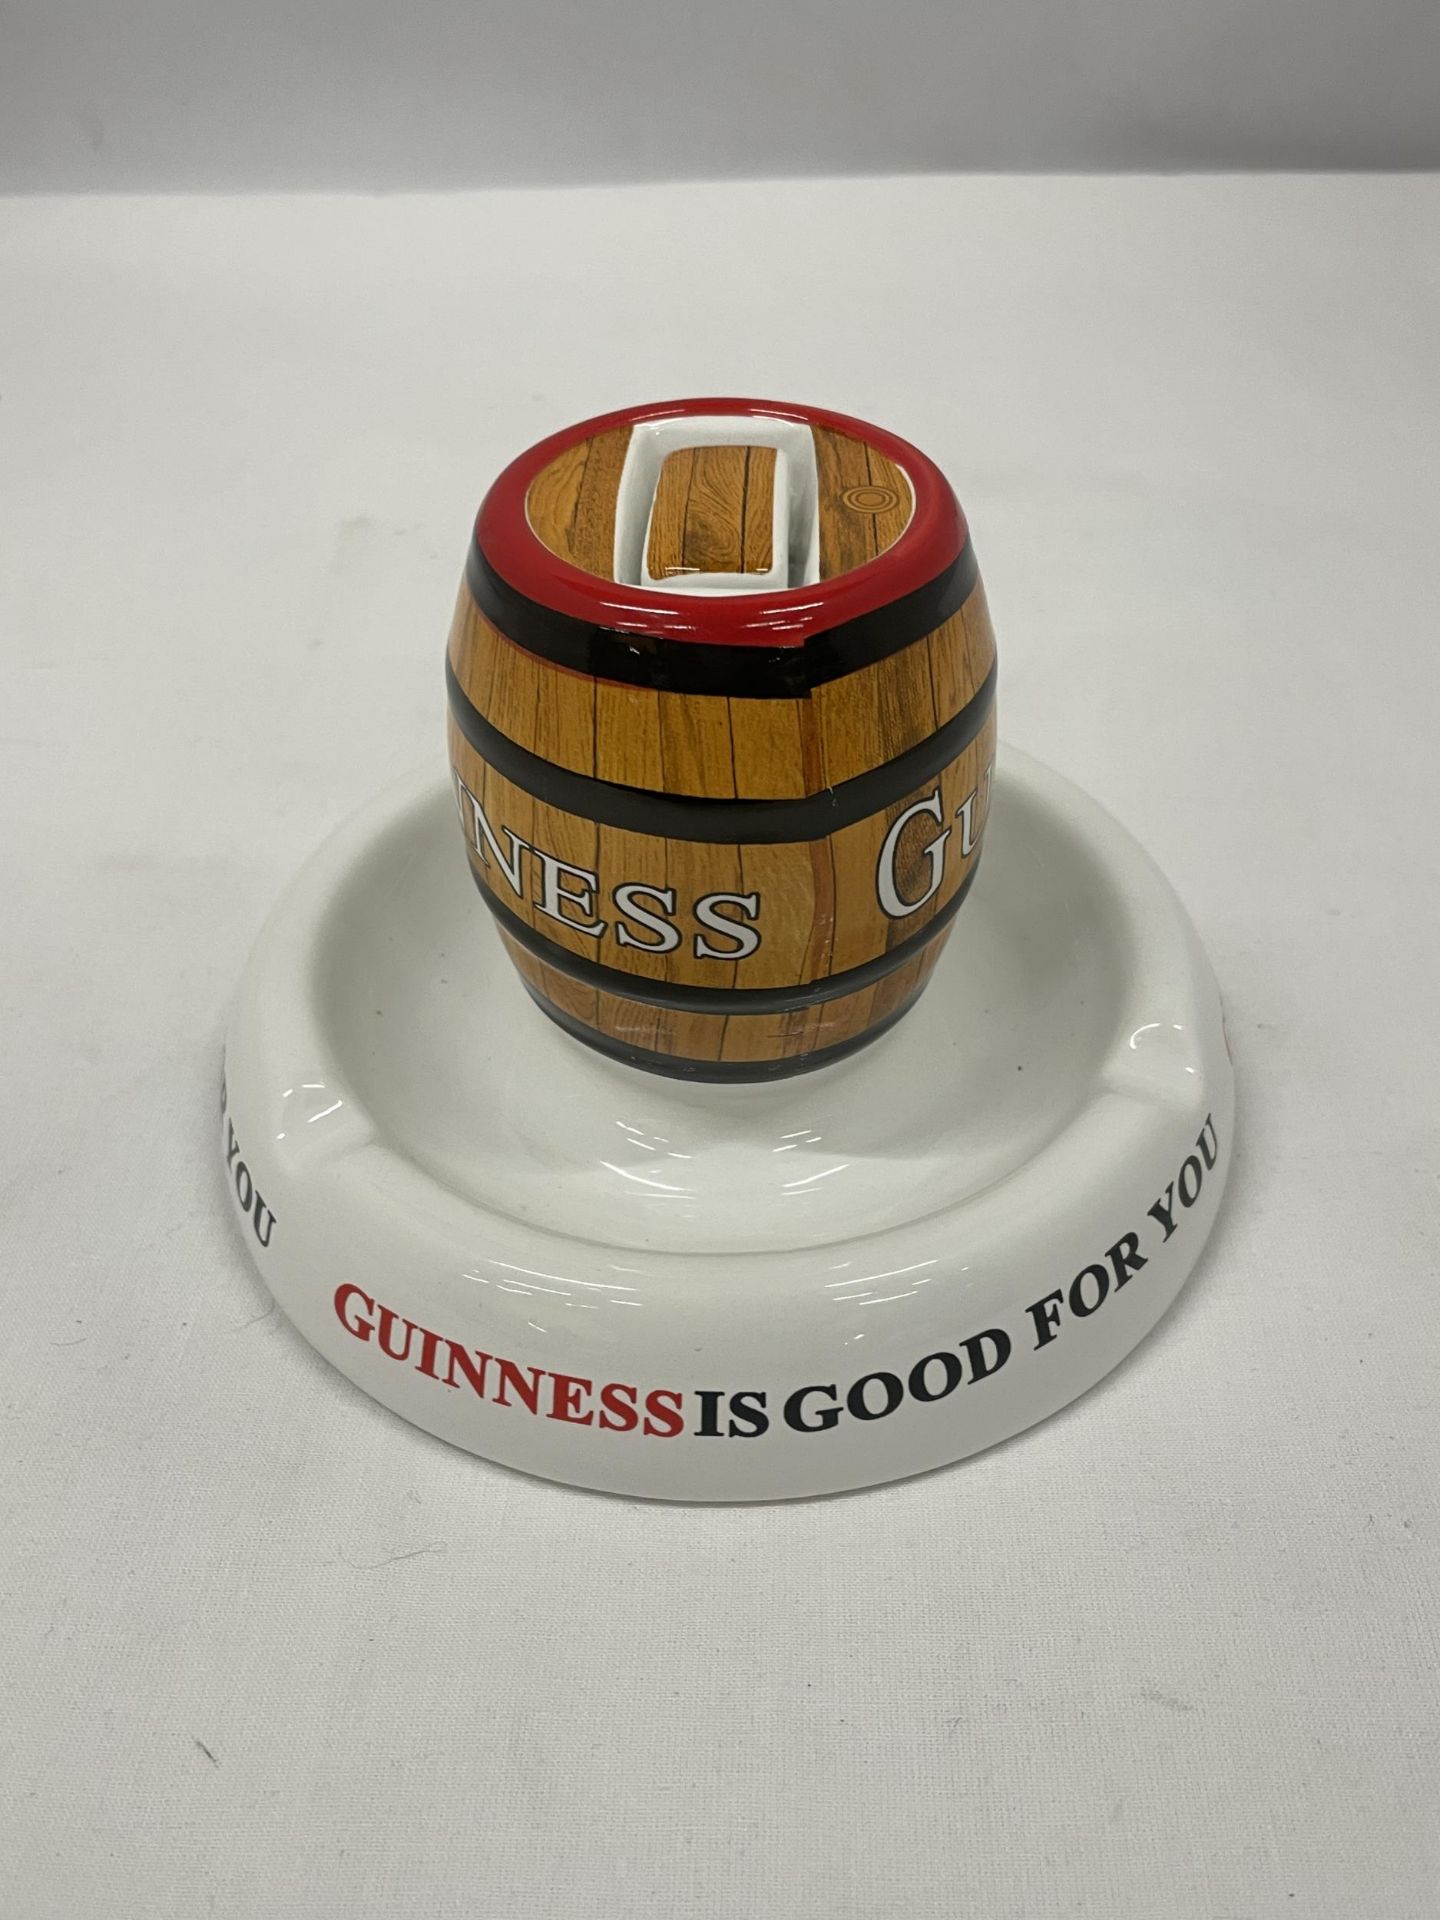 A MINTONS GUINNESS IS GOOD FOR YOU ASHTRAY / MATCHBOX HOLDER